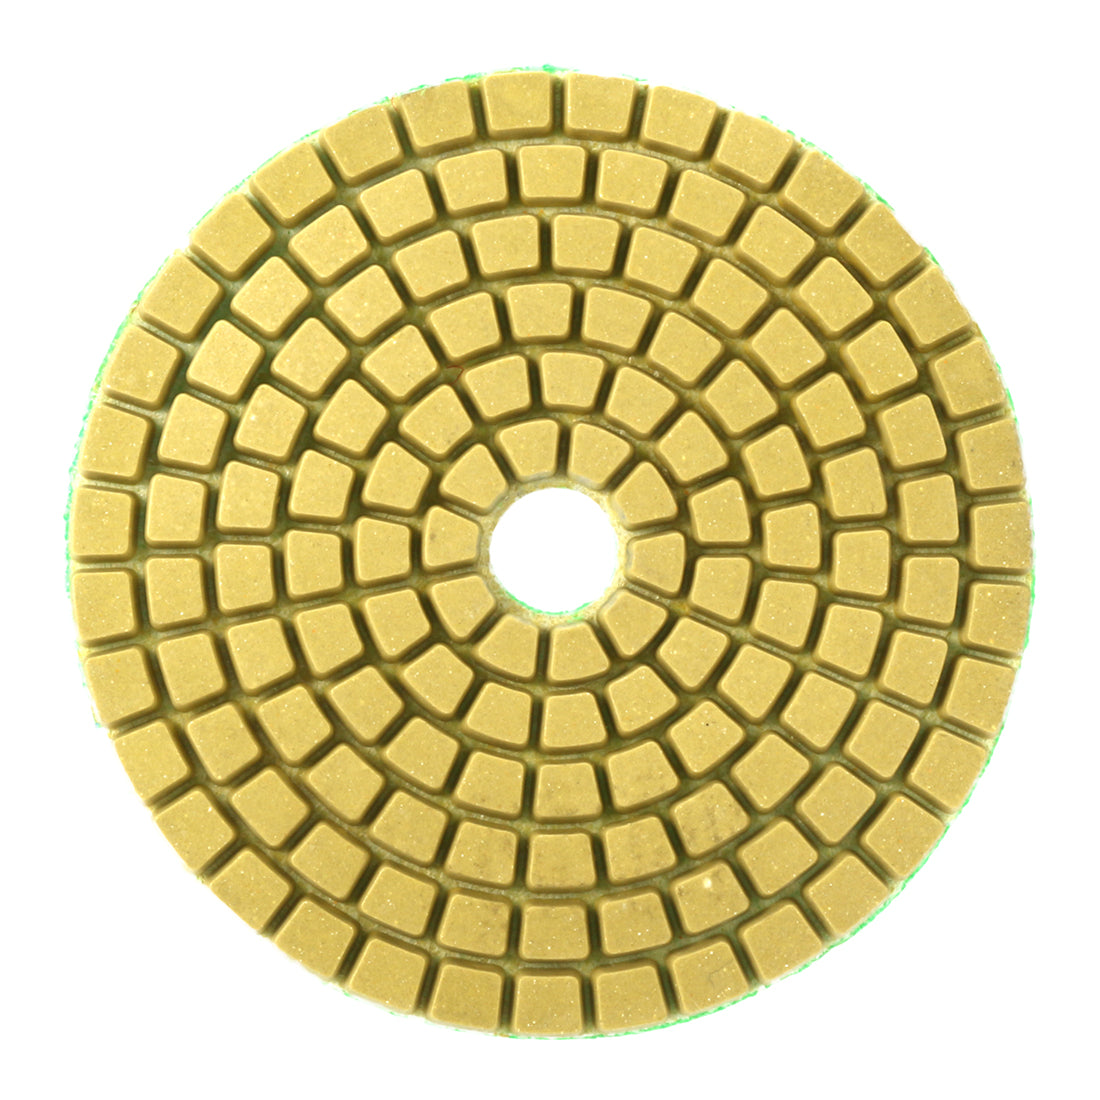 uxcell Uxcell 3-inch Diamond Wet Polishing Pad Grit 1000 10pcs for Granite Concrete Stone